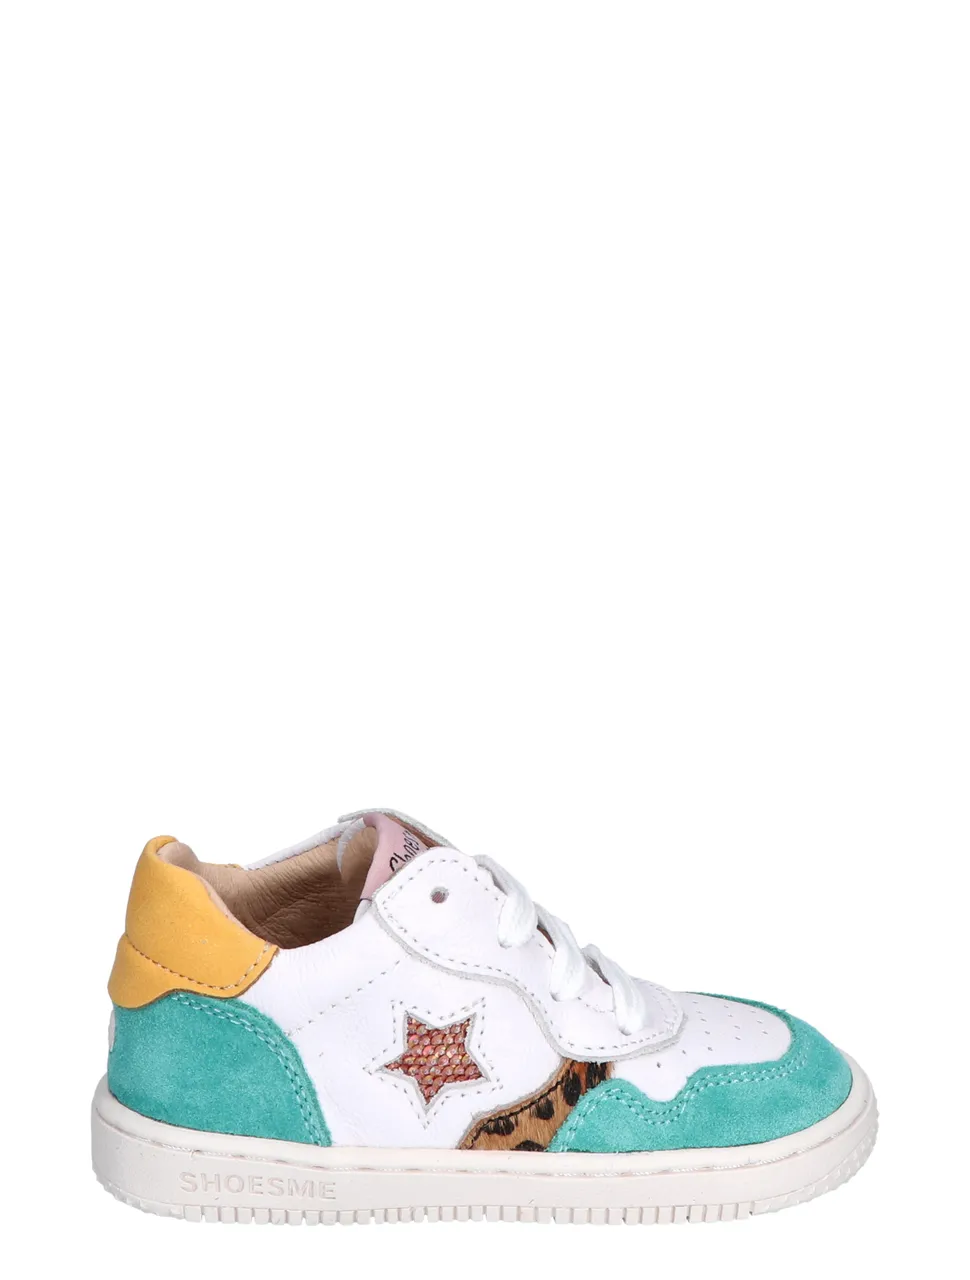 Shoesme BN24S014 White Turquoise Baby-schoenen